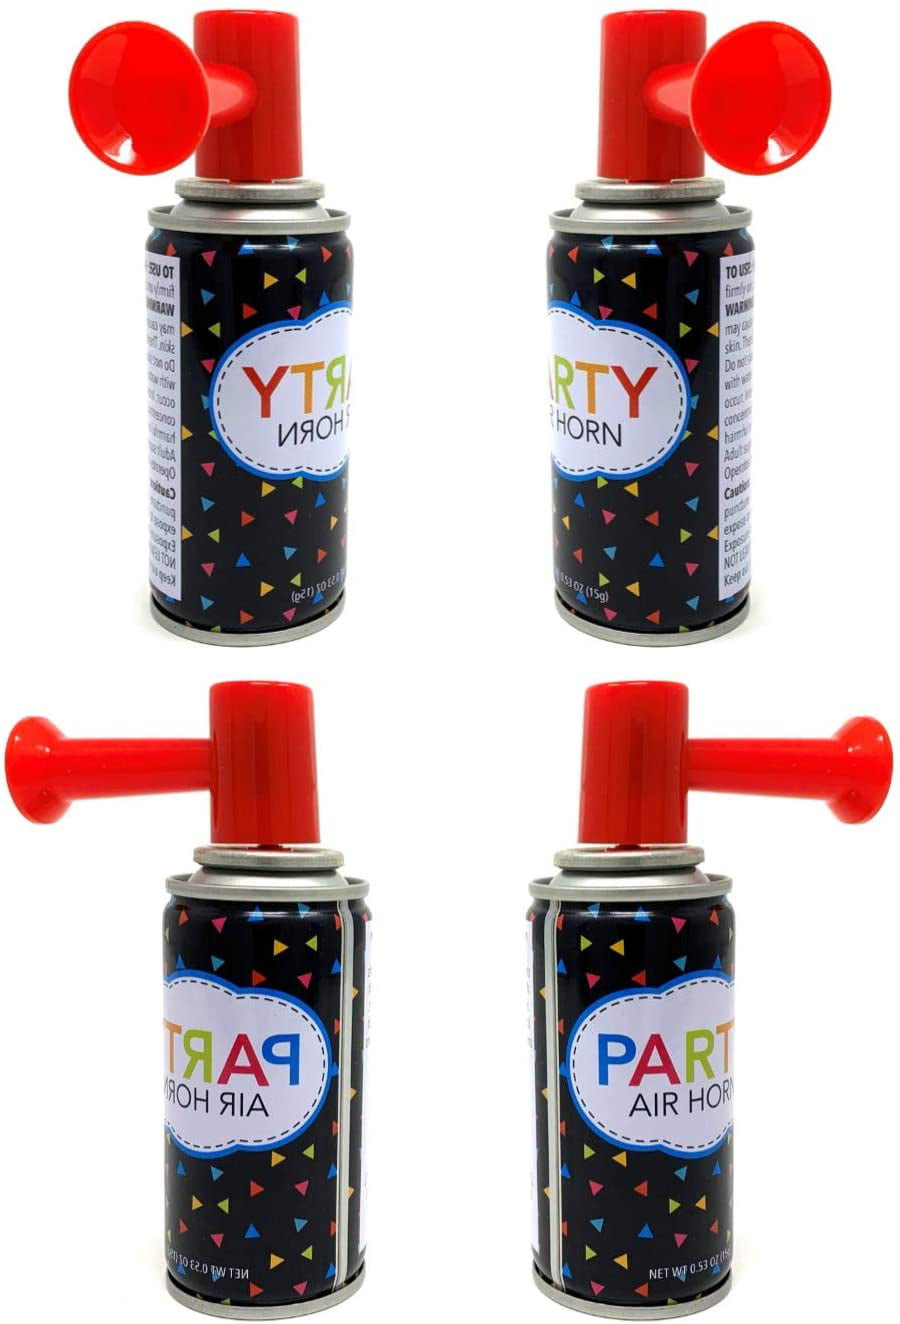 4 X Air Horn Portable security safety Party Sports Boat LOUD BLAST .81OZ FREE SH